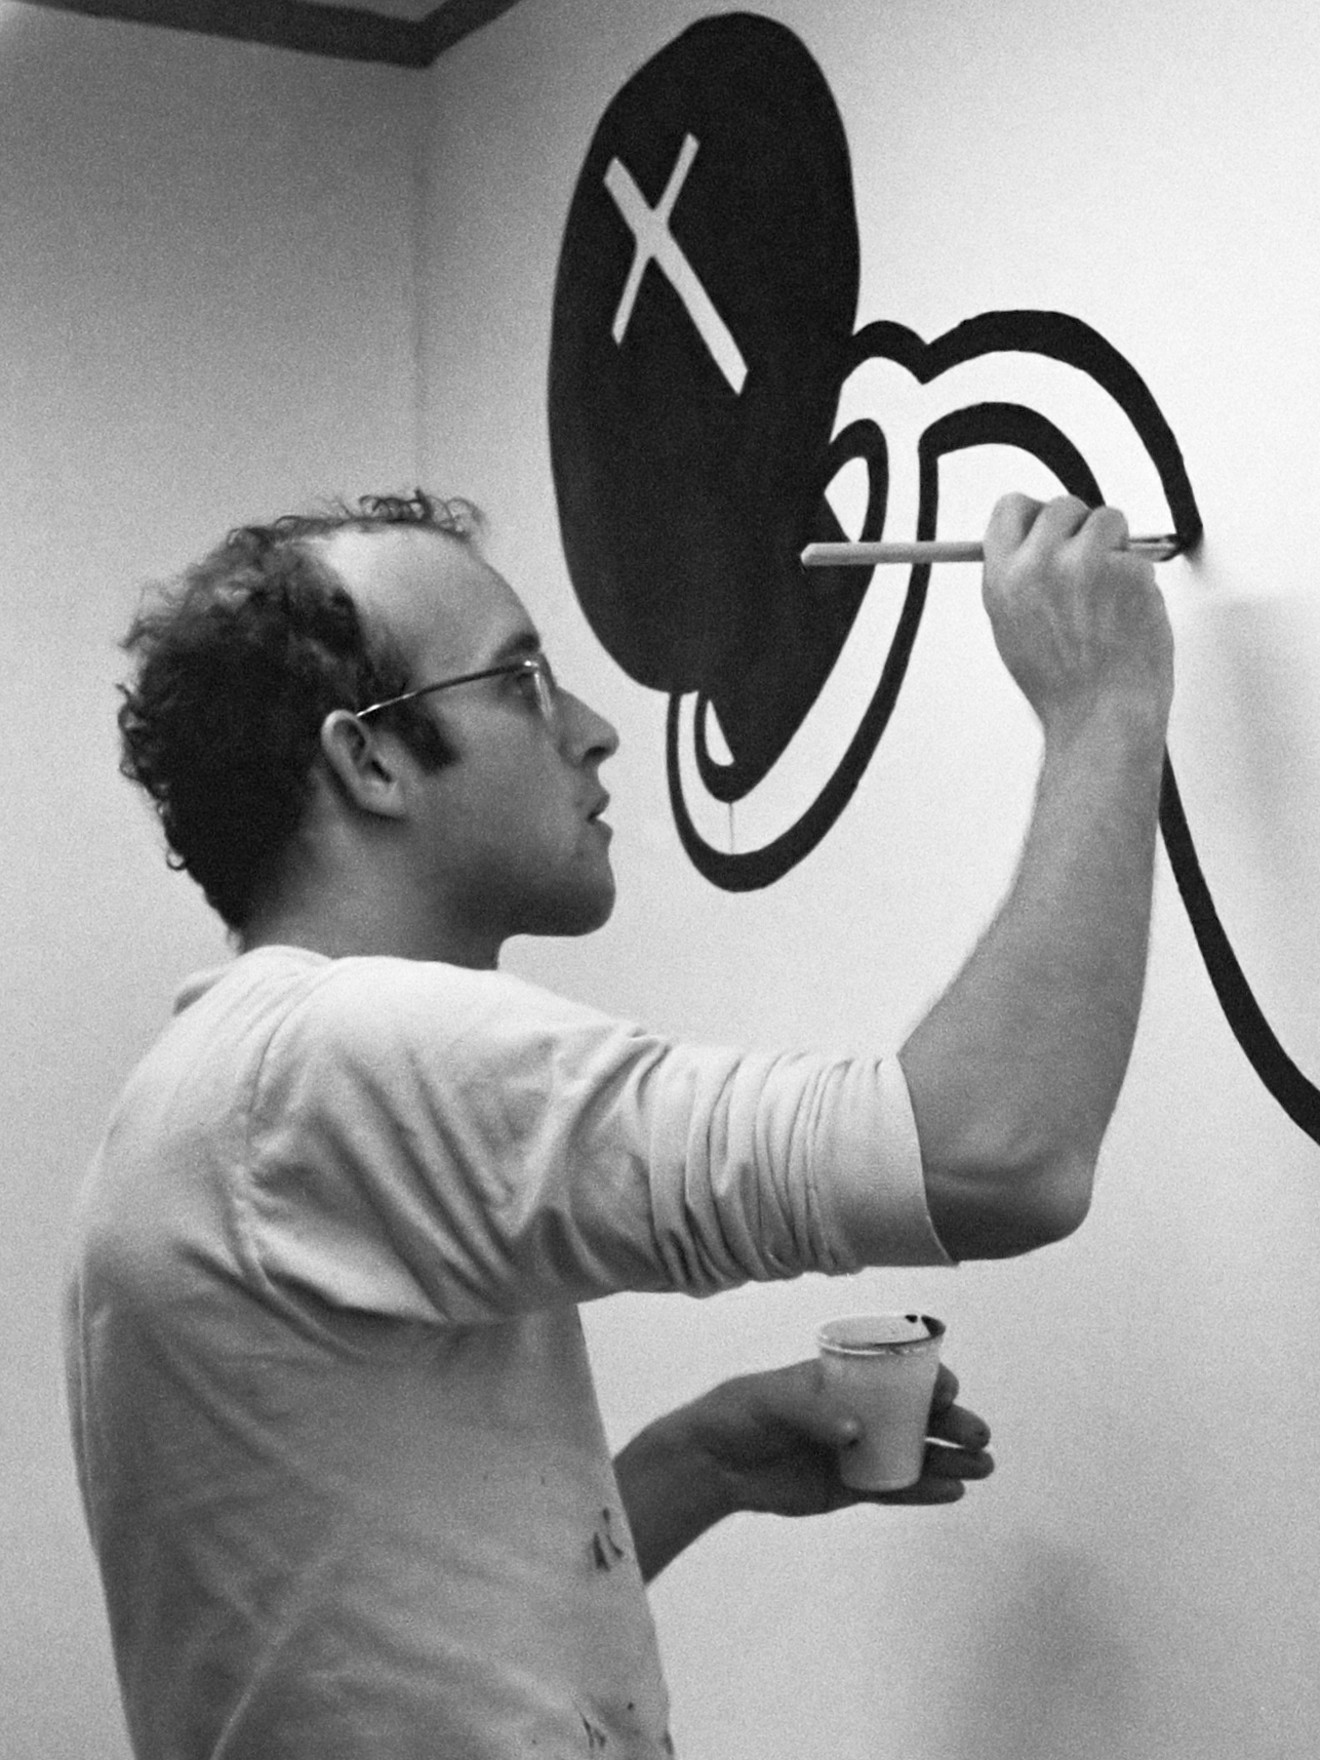 Keith Haring's socially conscious works will be on display at Arlington's Museum of Art starting in June.